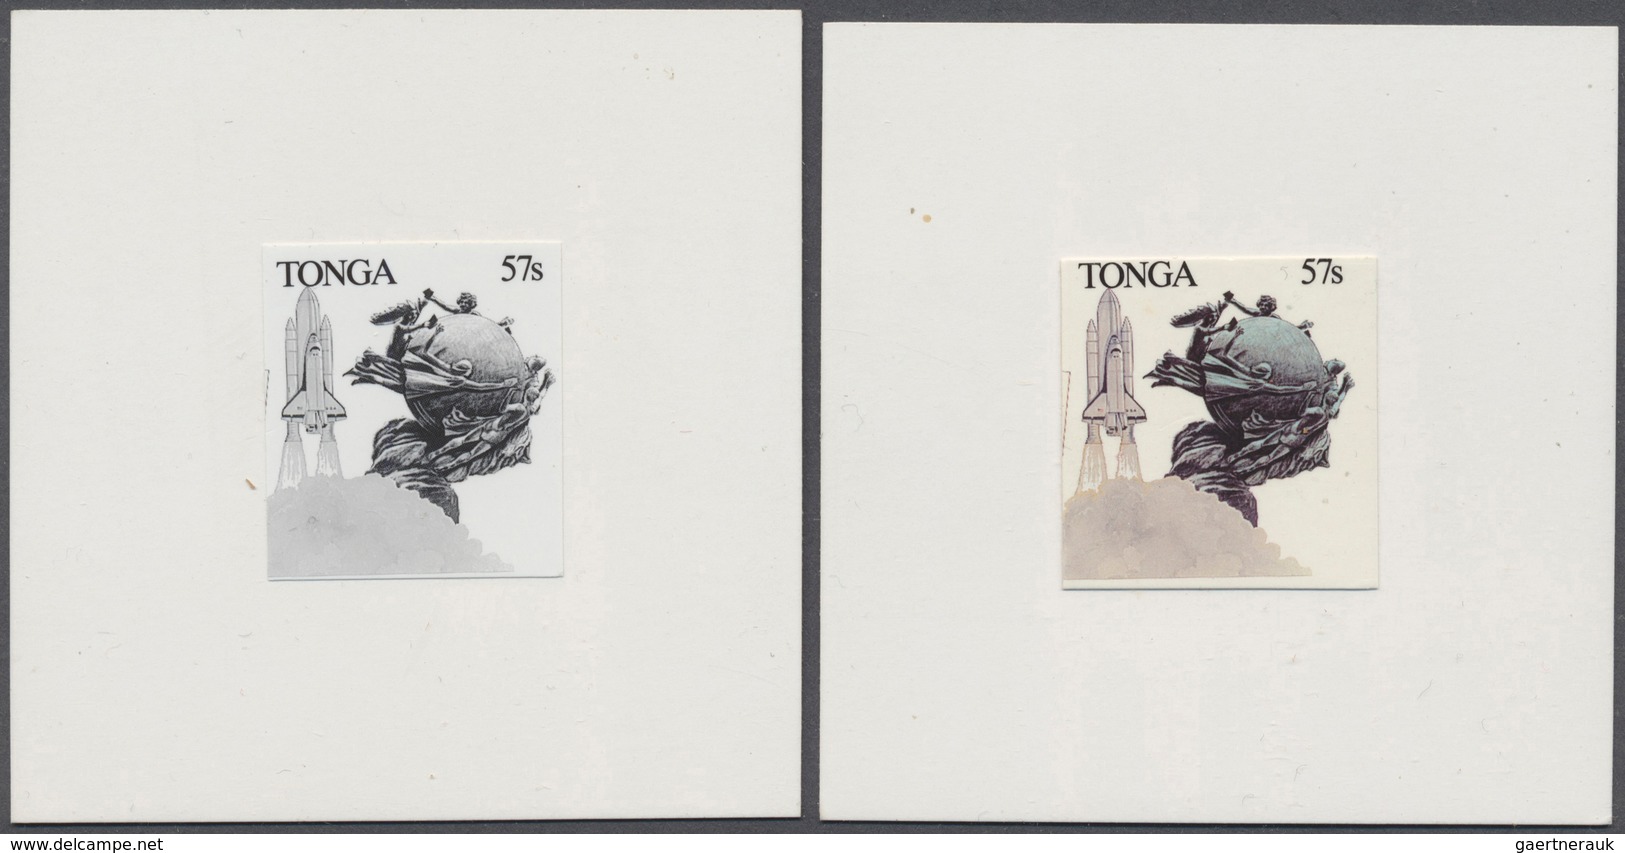 Tonga: 1943/2000, u/m collection of approx. 1.700 specialities like specimen overprints, imperfs, st